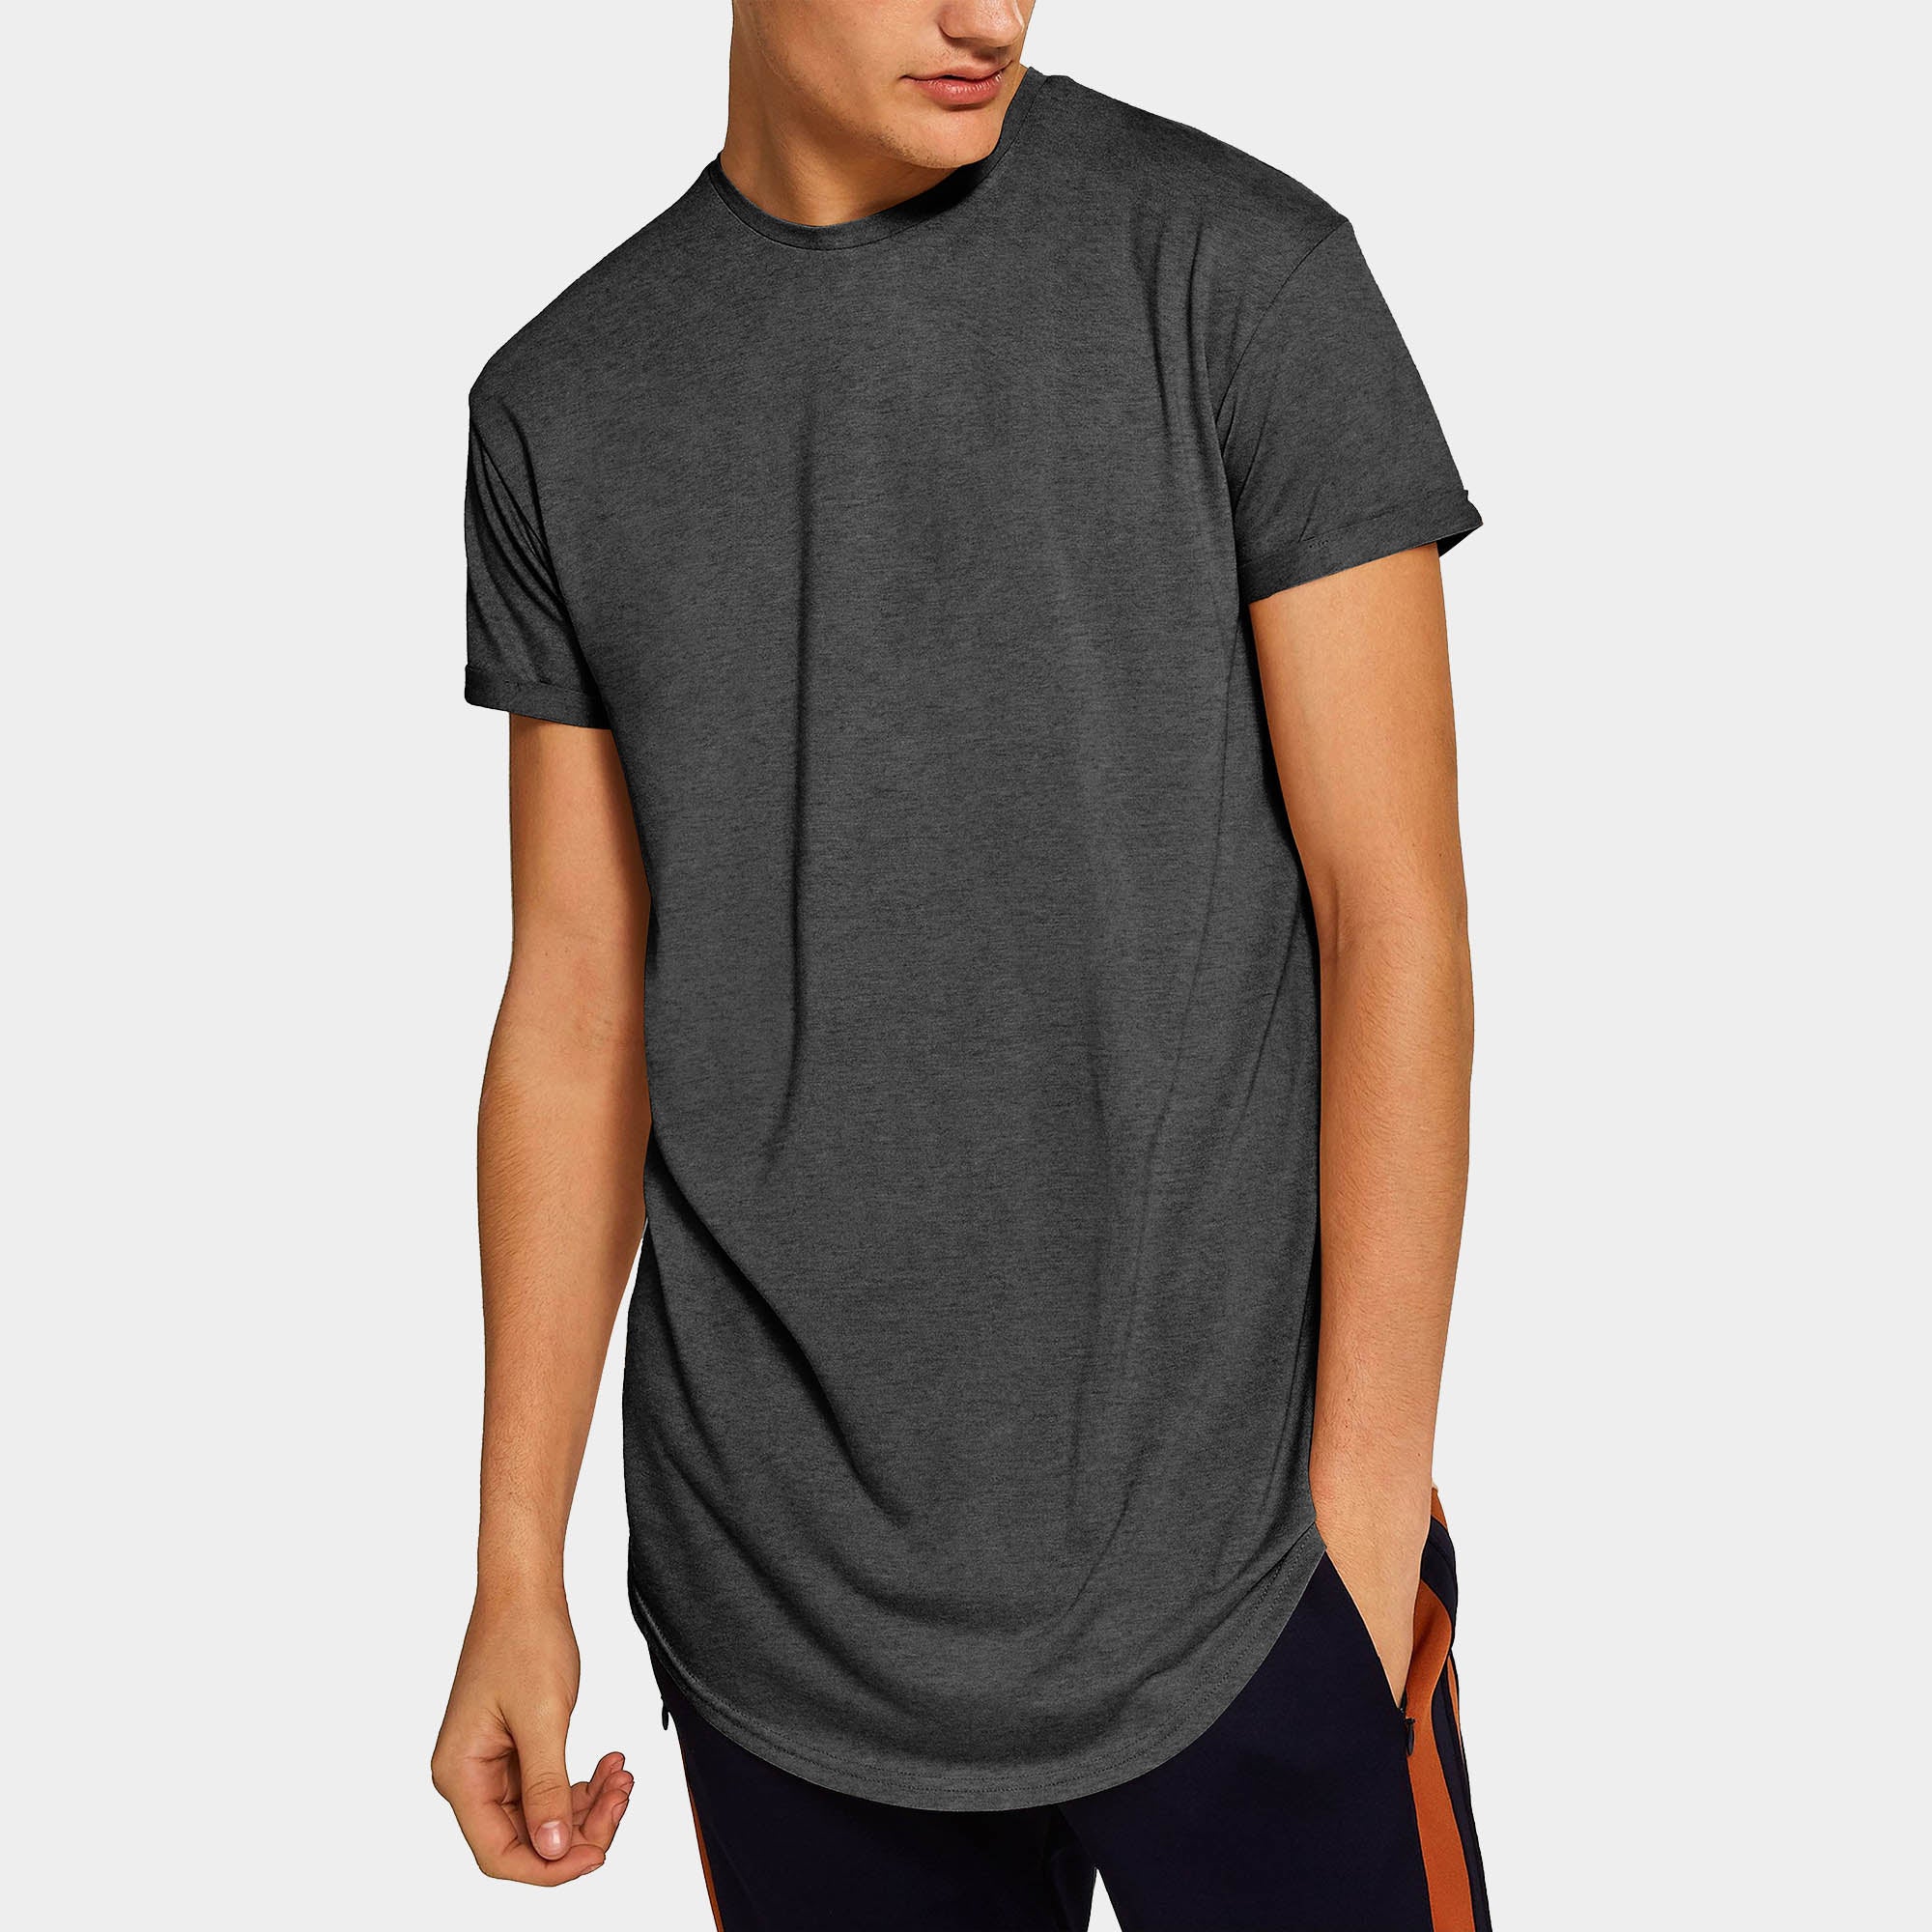 Men's Longline T-Shirts with Round Bottom - T-Shirts & Tank Tops